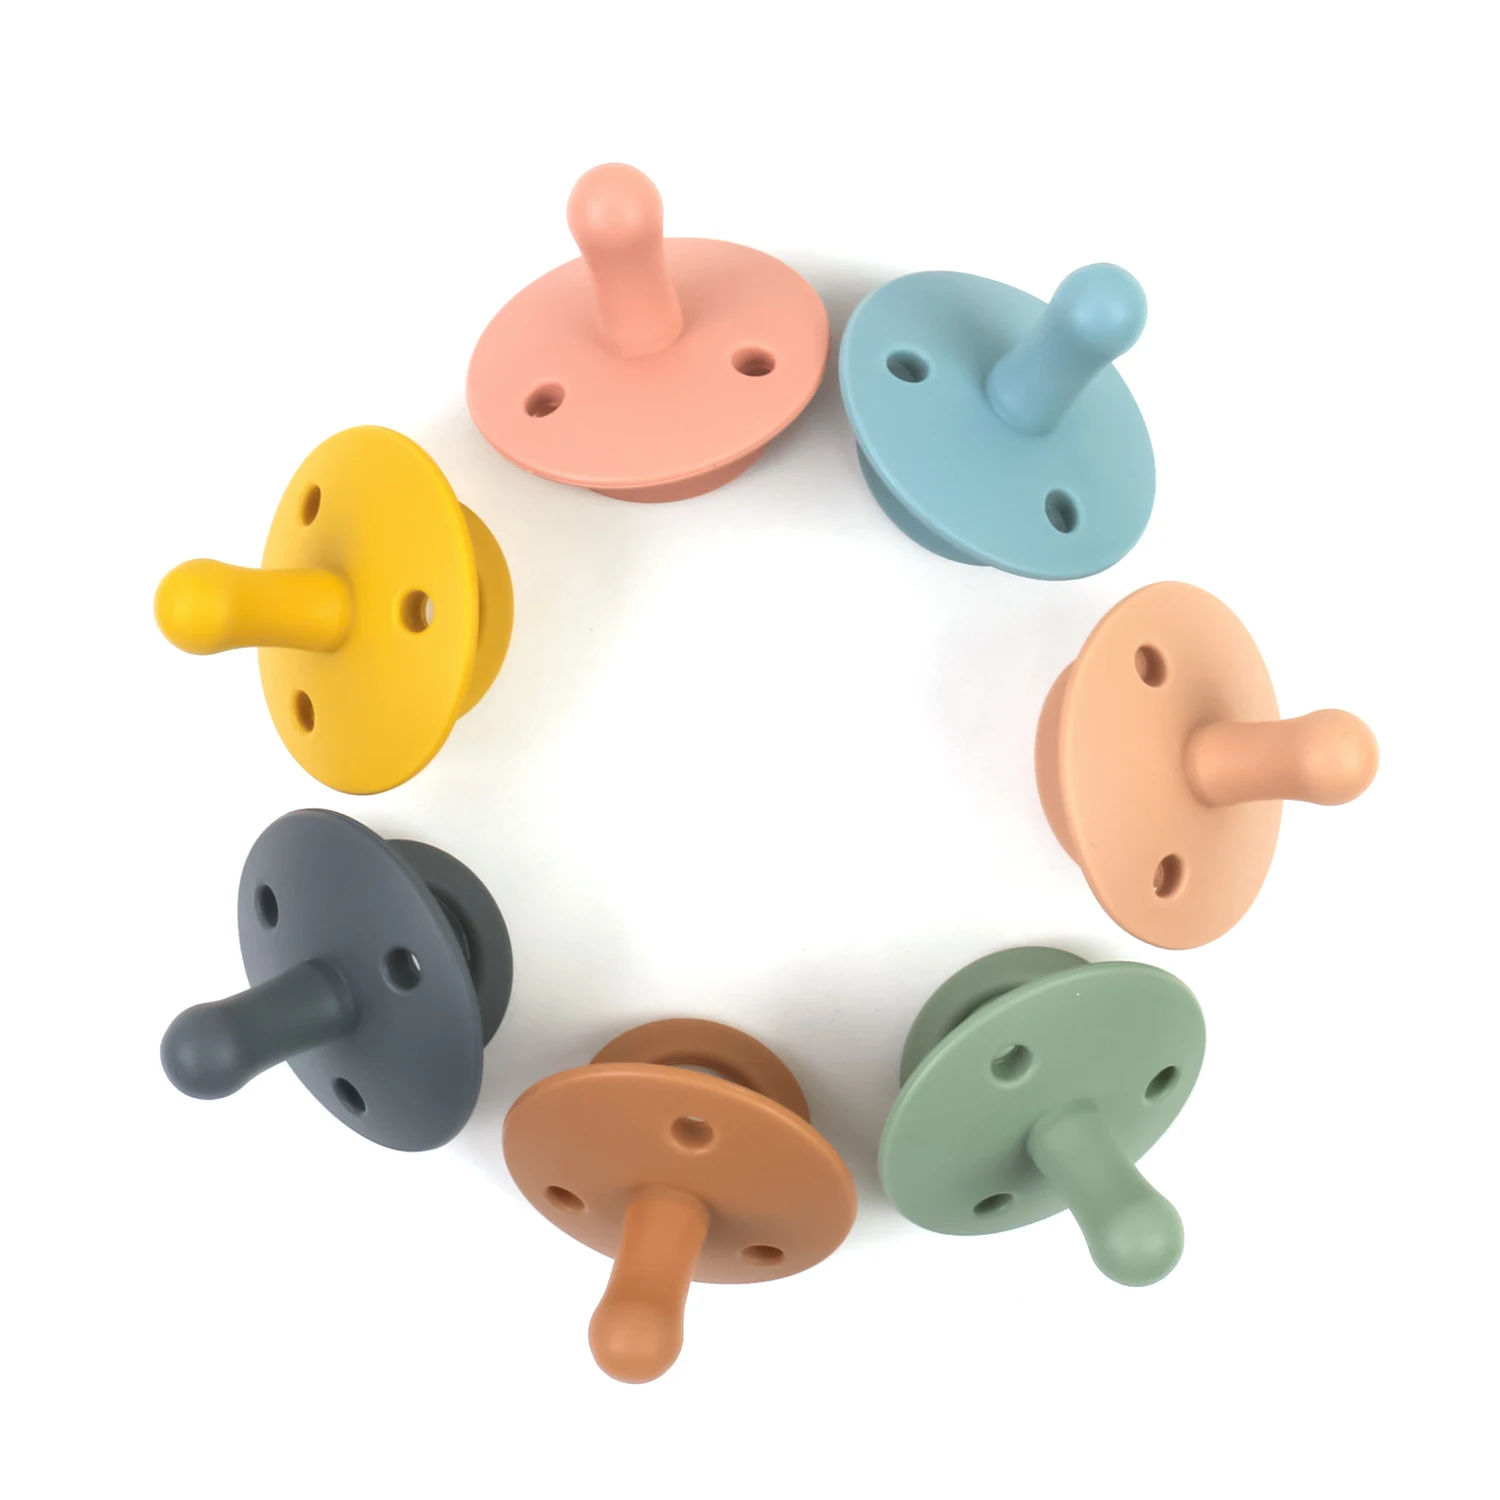 

baby pacifier gift baby shower Silicone teethers bib Infants Bite Chew Supplies Newborn Comfort Appease Nipple Dummy Pacifier